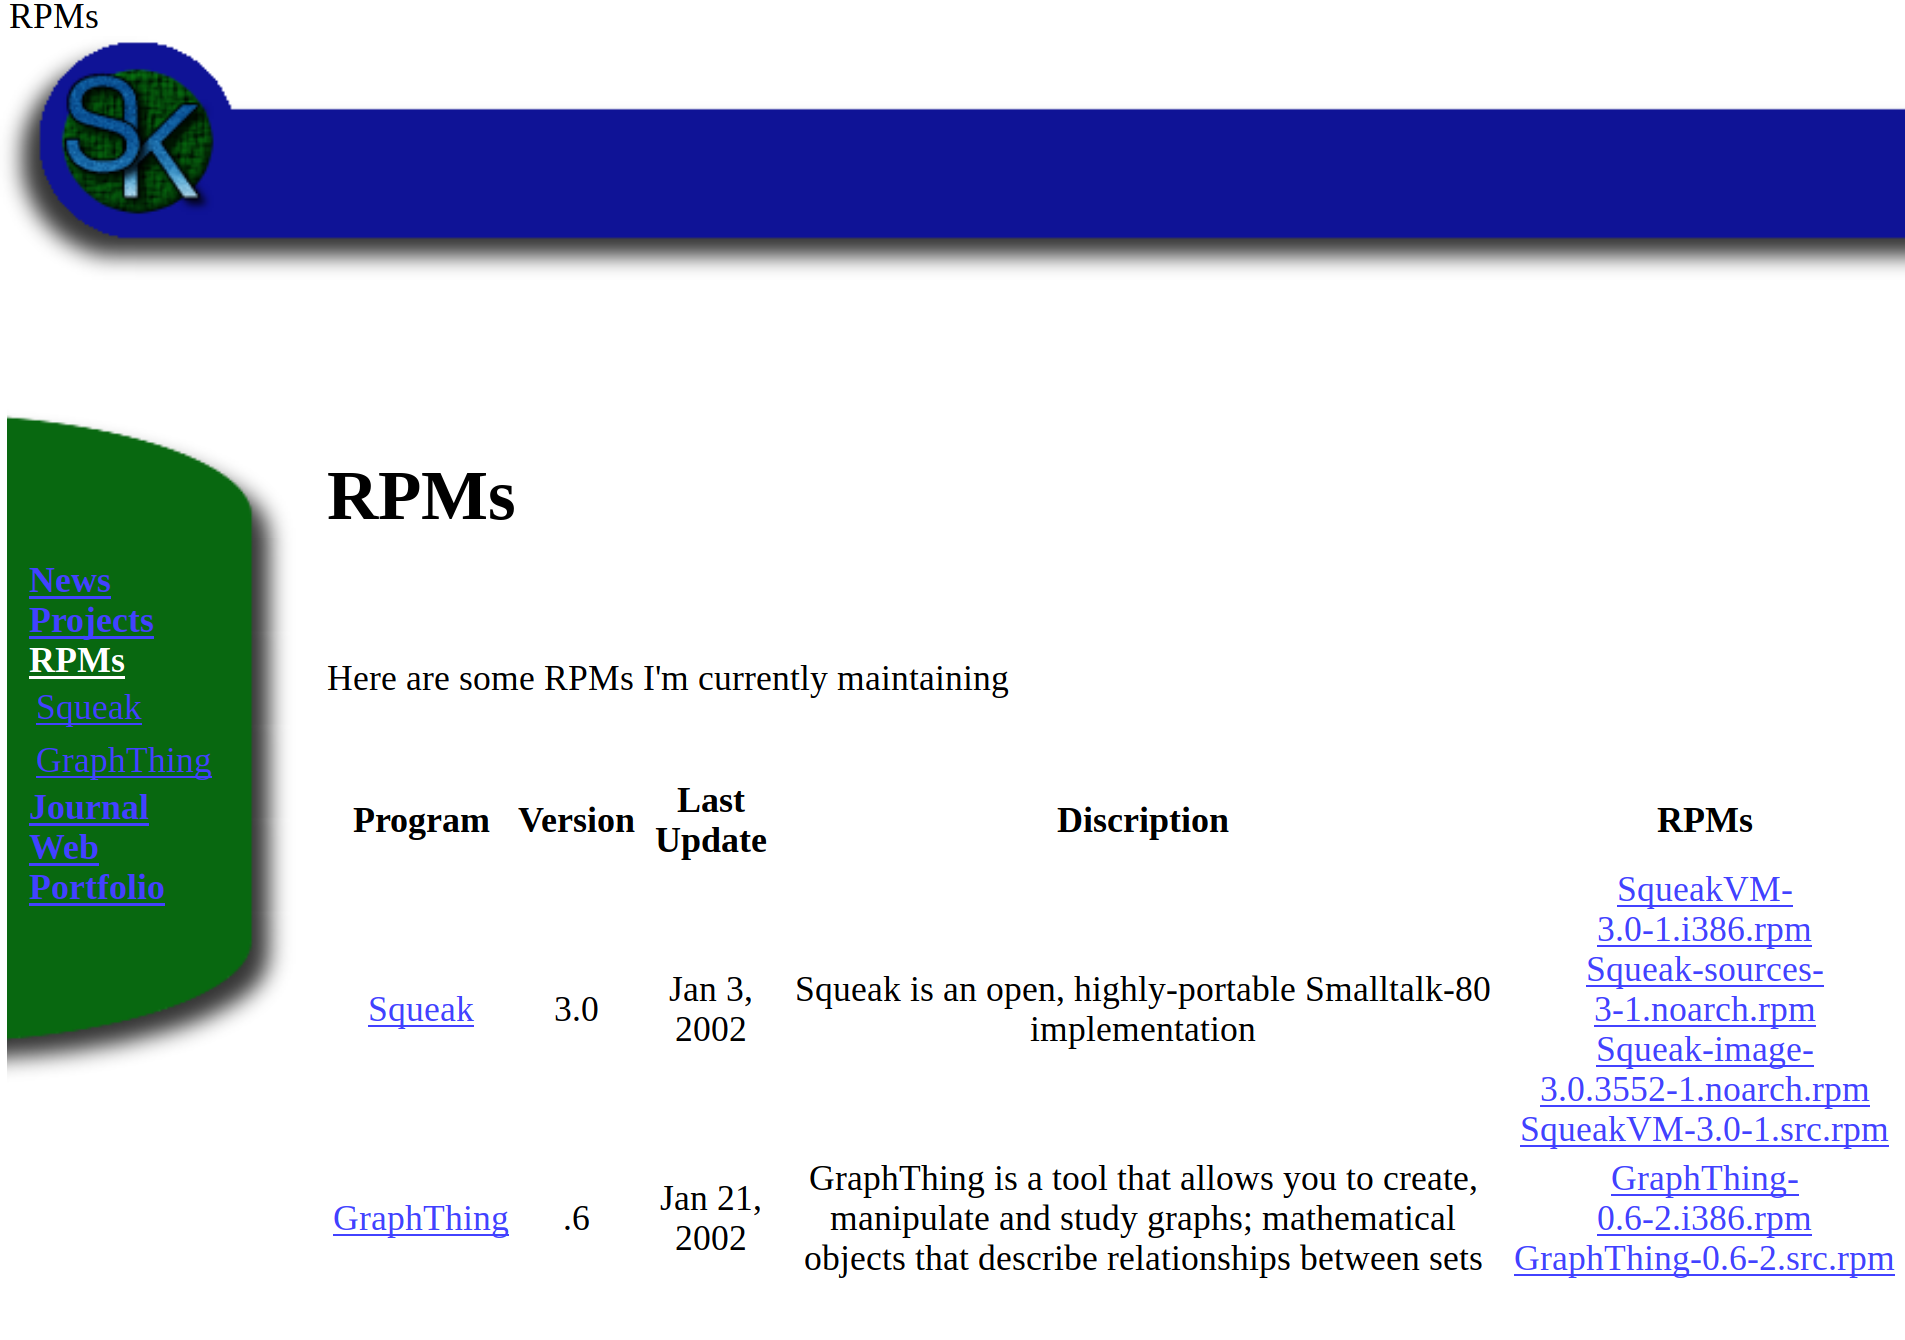 RPM package listing on my first professional website